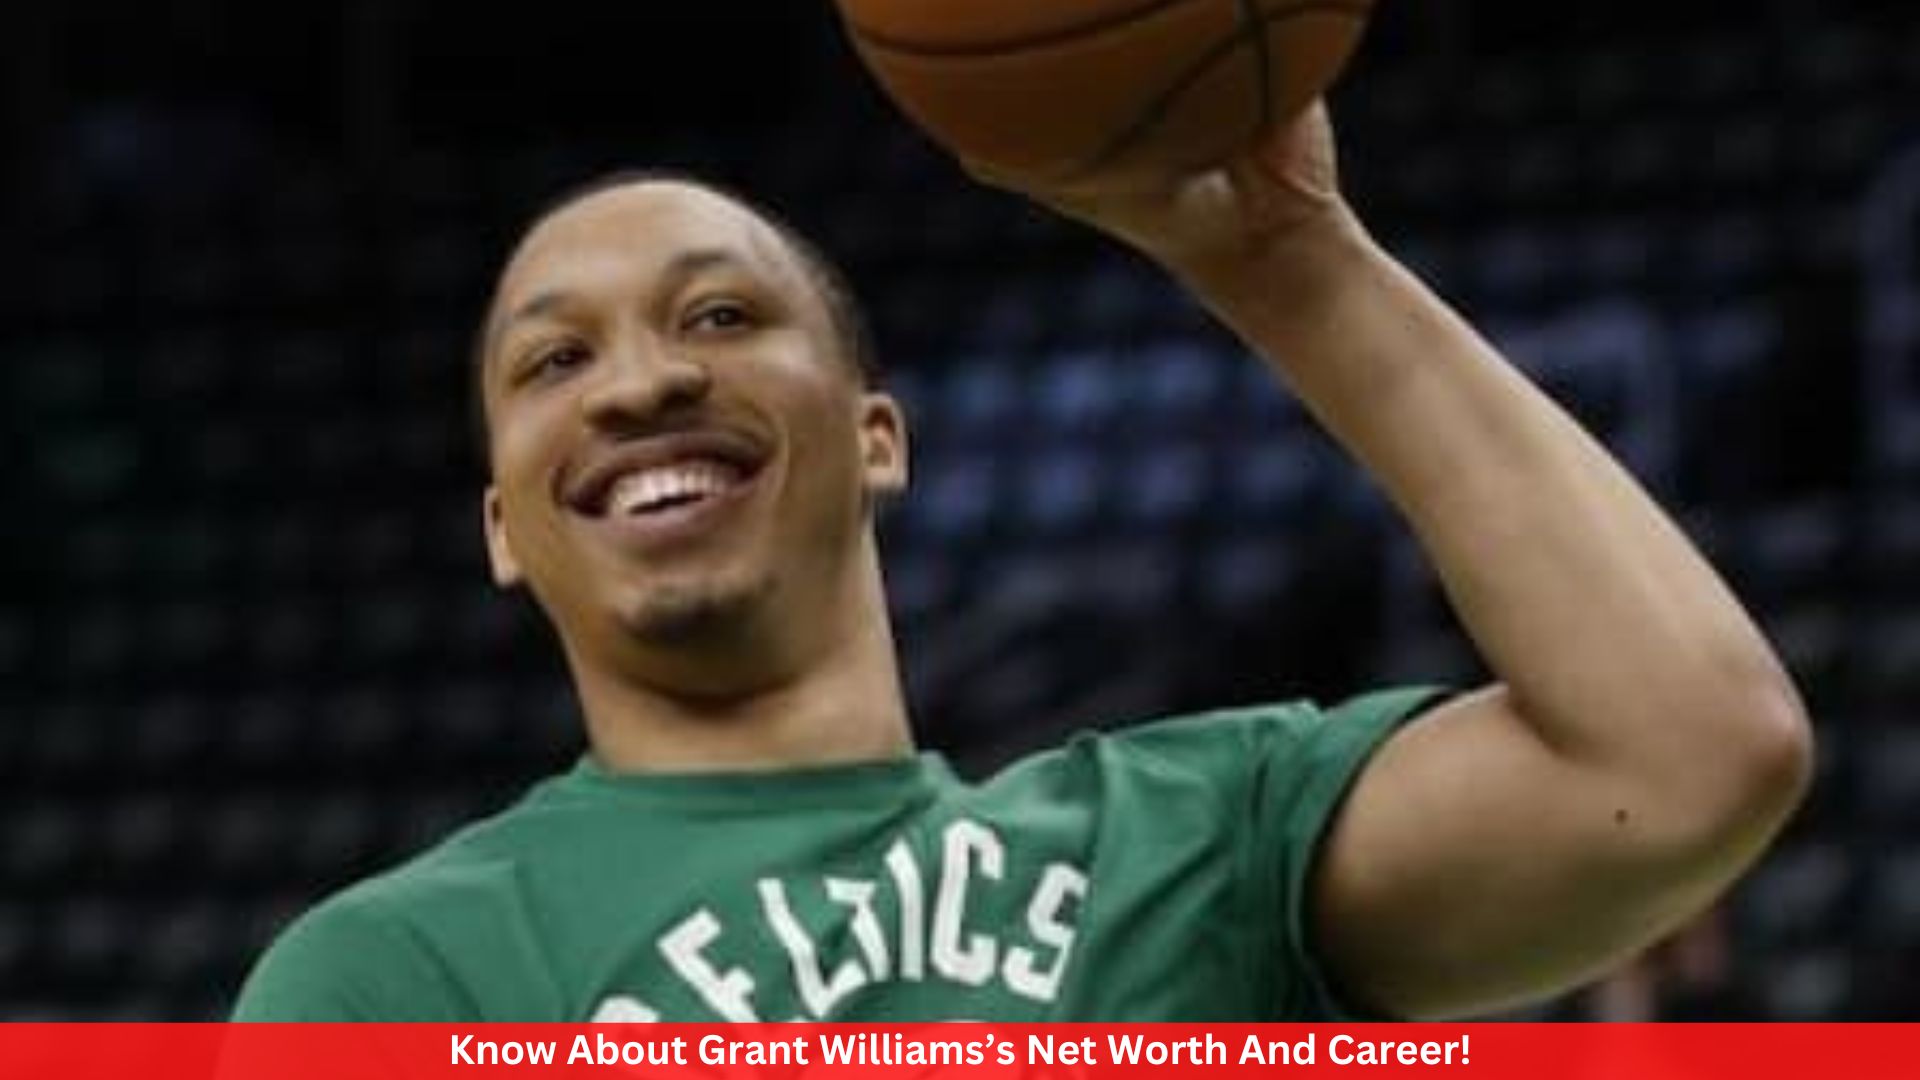 Know About Grant Williams’s Net Worth And Career!